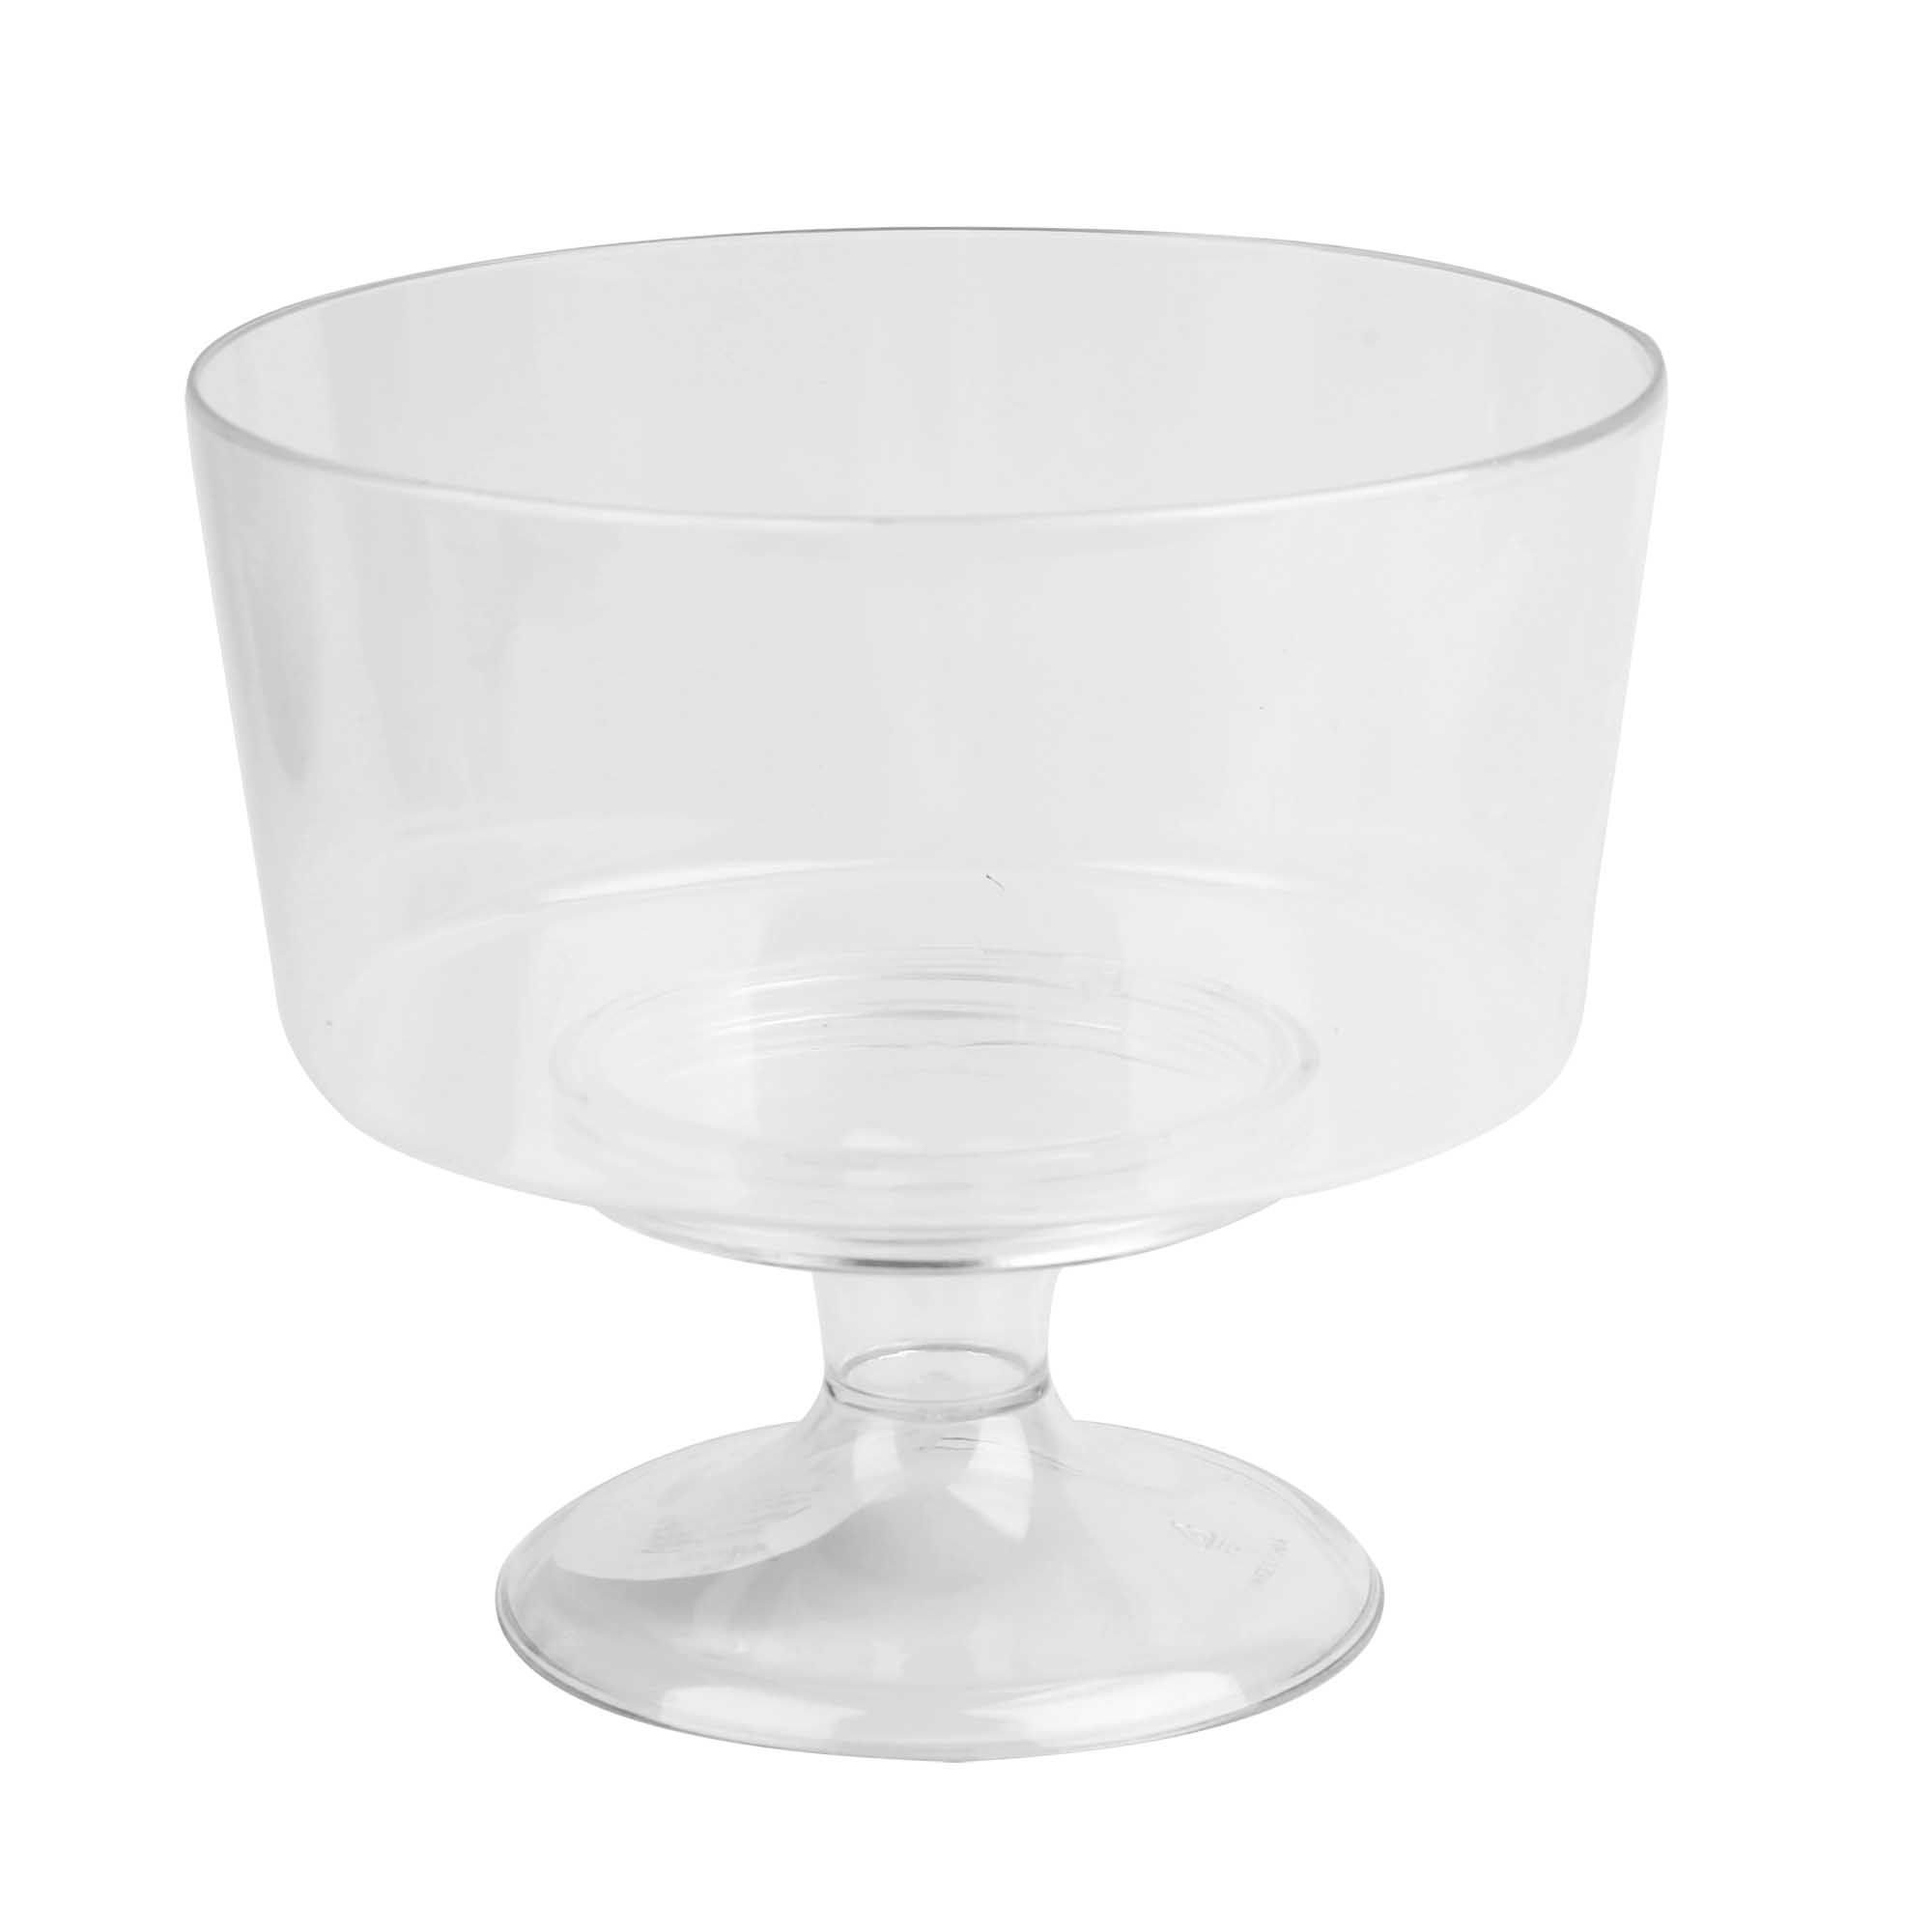 Way to Celebrate Clear Truffle Bowl-Elegant 7-inch Wide Dessert and Candy Serving Bowl, Plastic | Walmart (US)